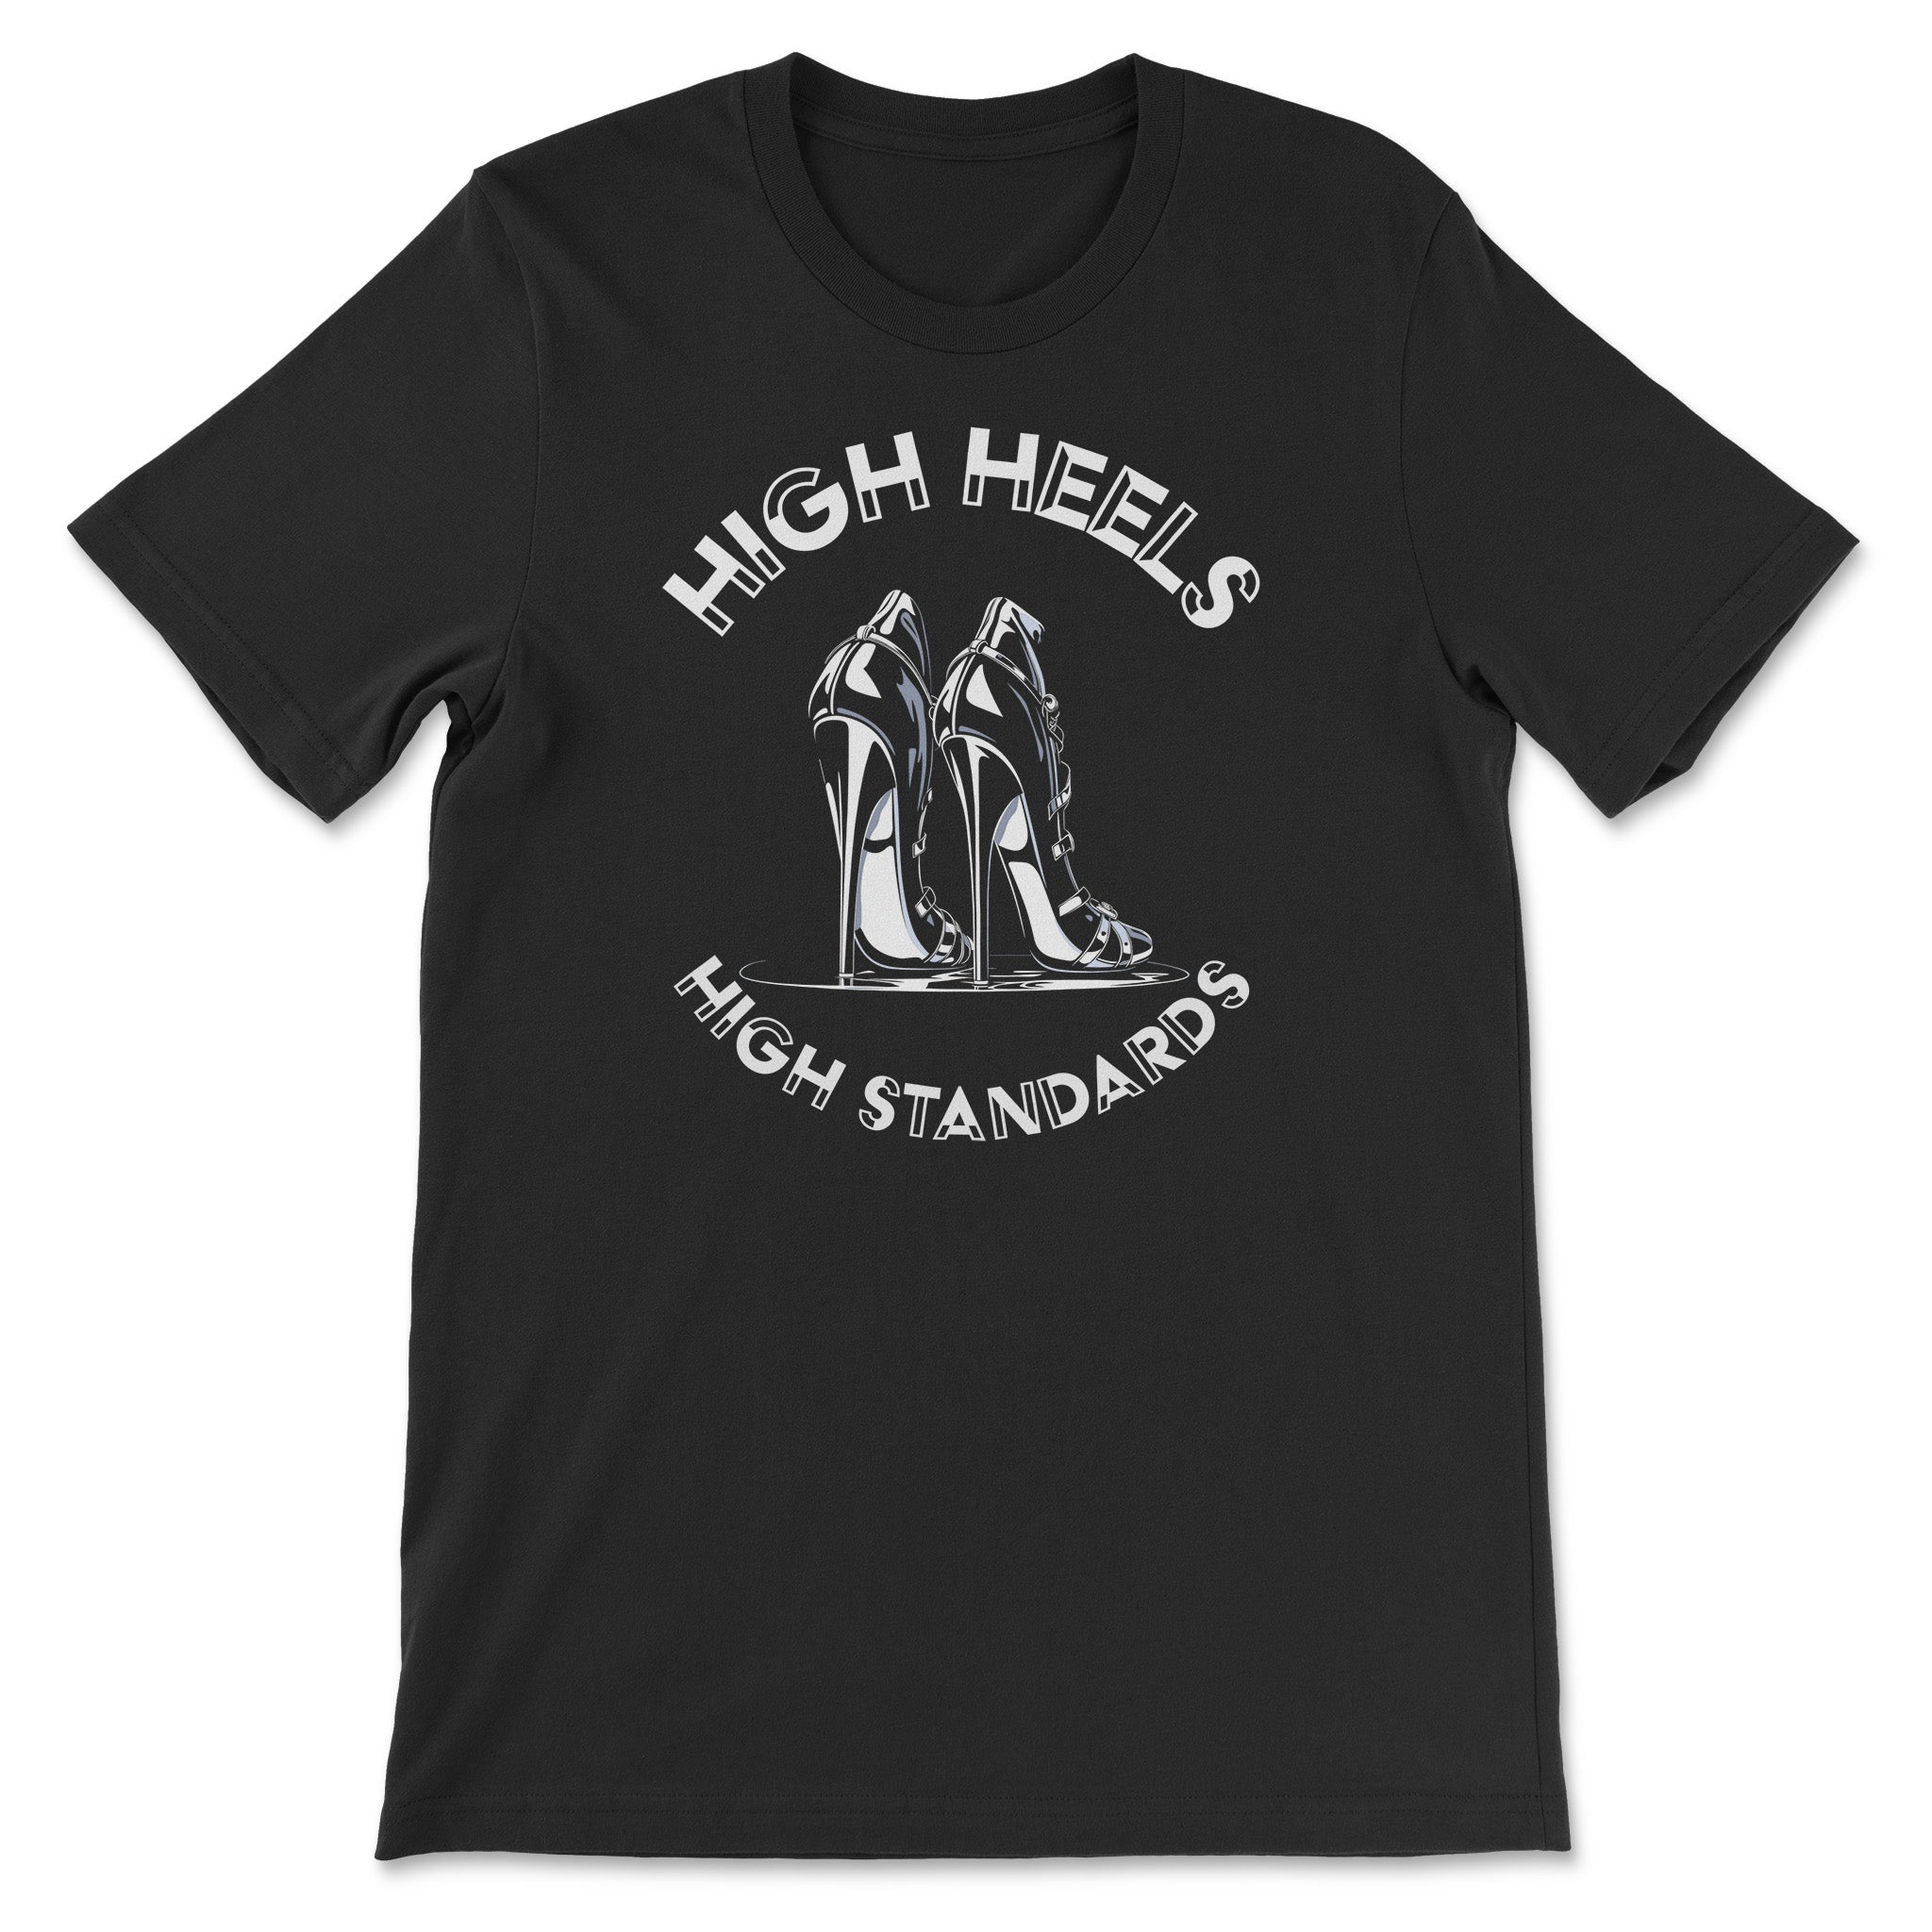 High Heels, High Standards T-Shirt – Step Up Your Style! - Hunky Tops